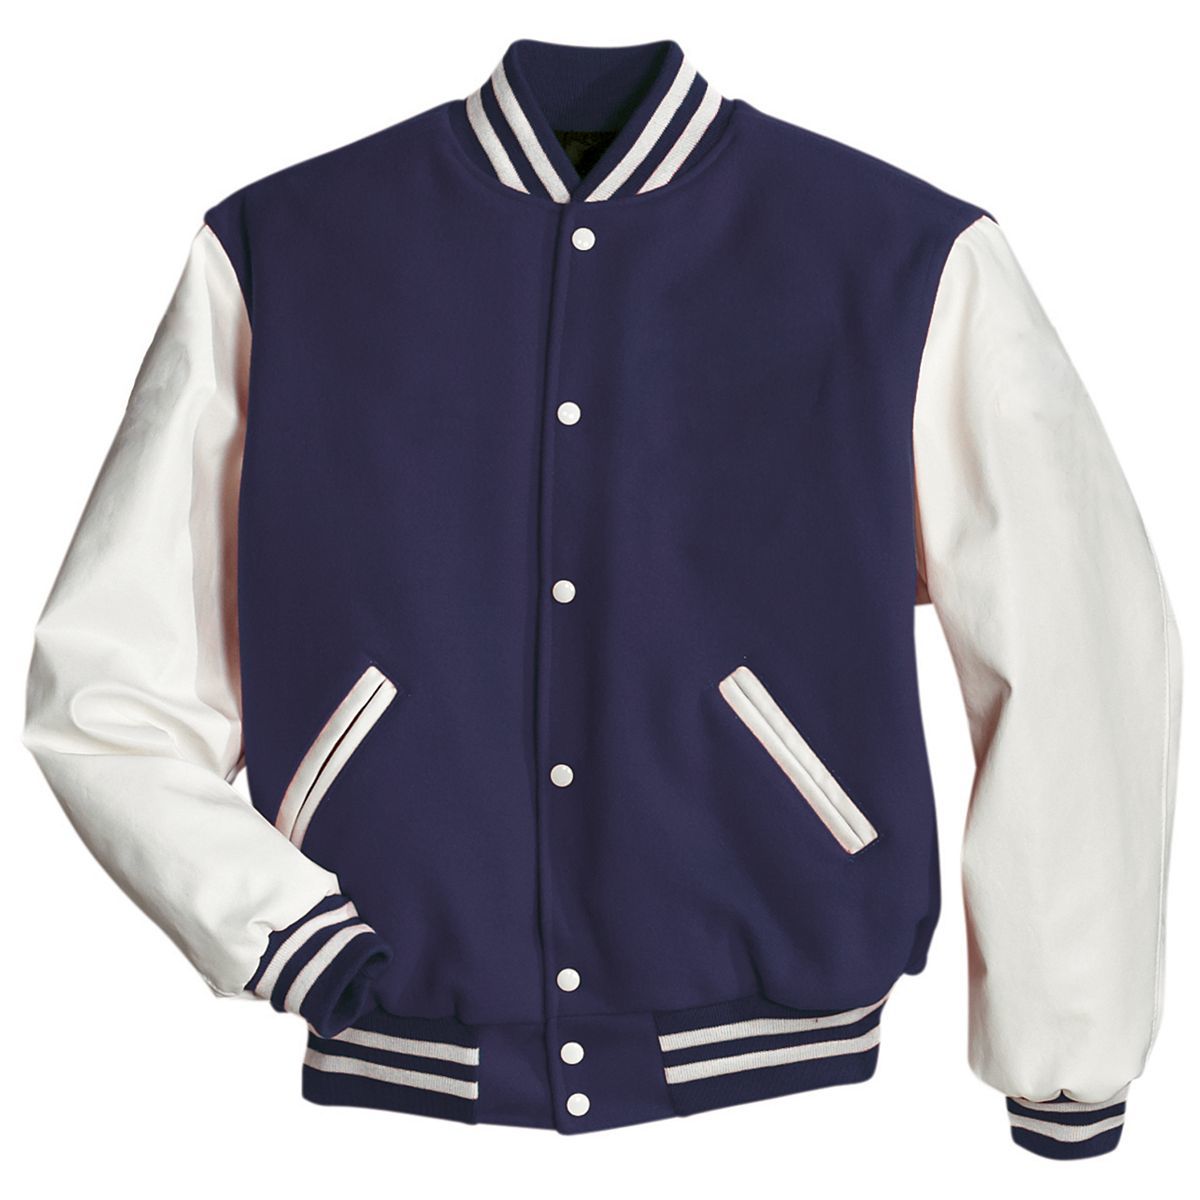 Holloway Award Jacket in Dark Navy/White  -Part of the Adult, Adult-Jacket, Holloway, Outerwear product lines at KanaleyCreations.com